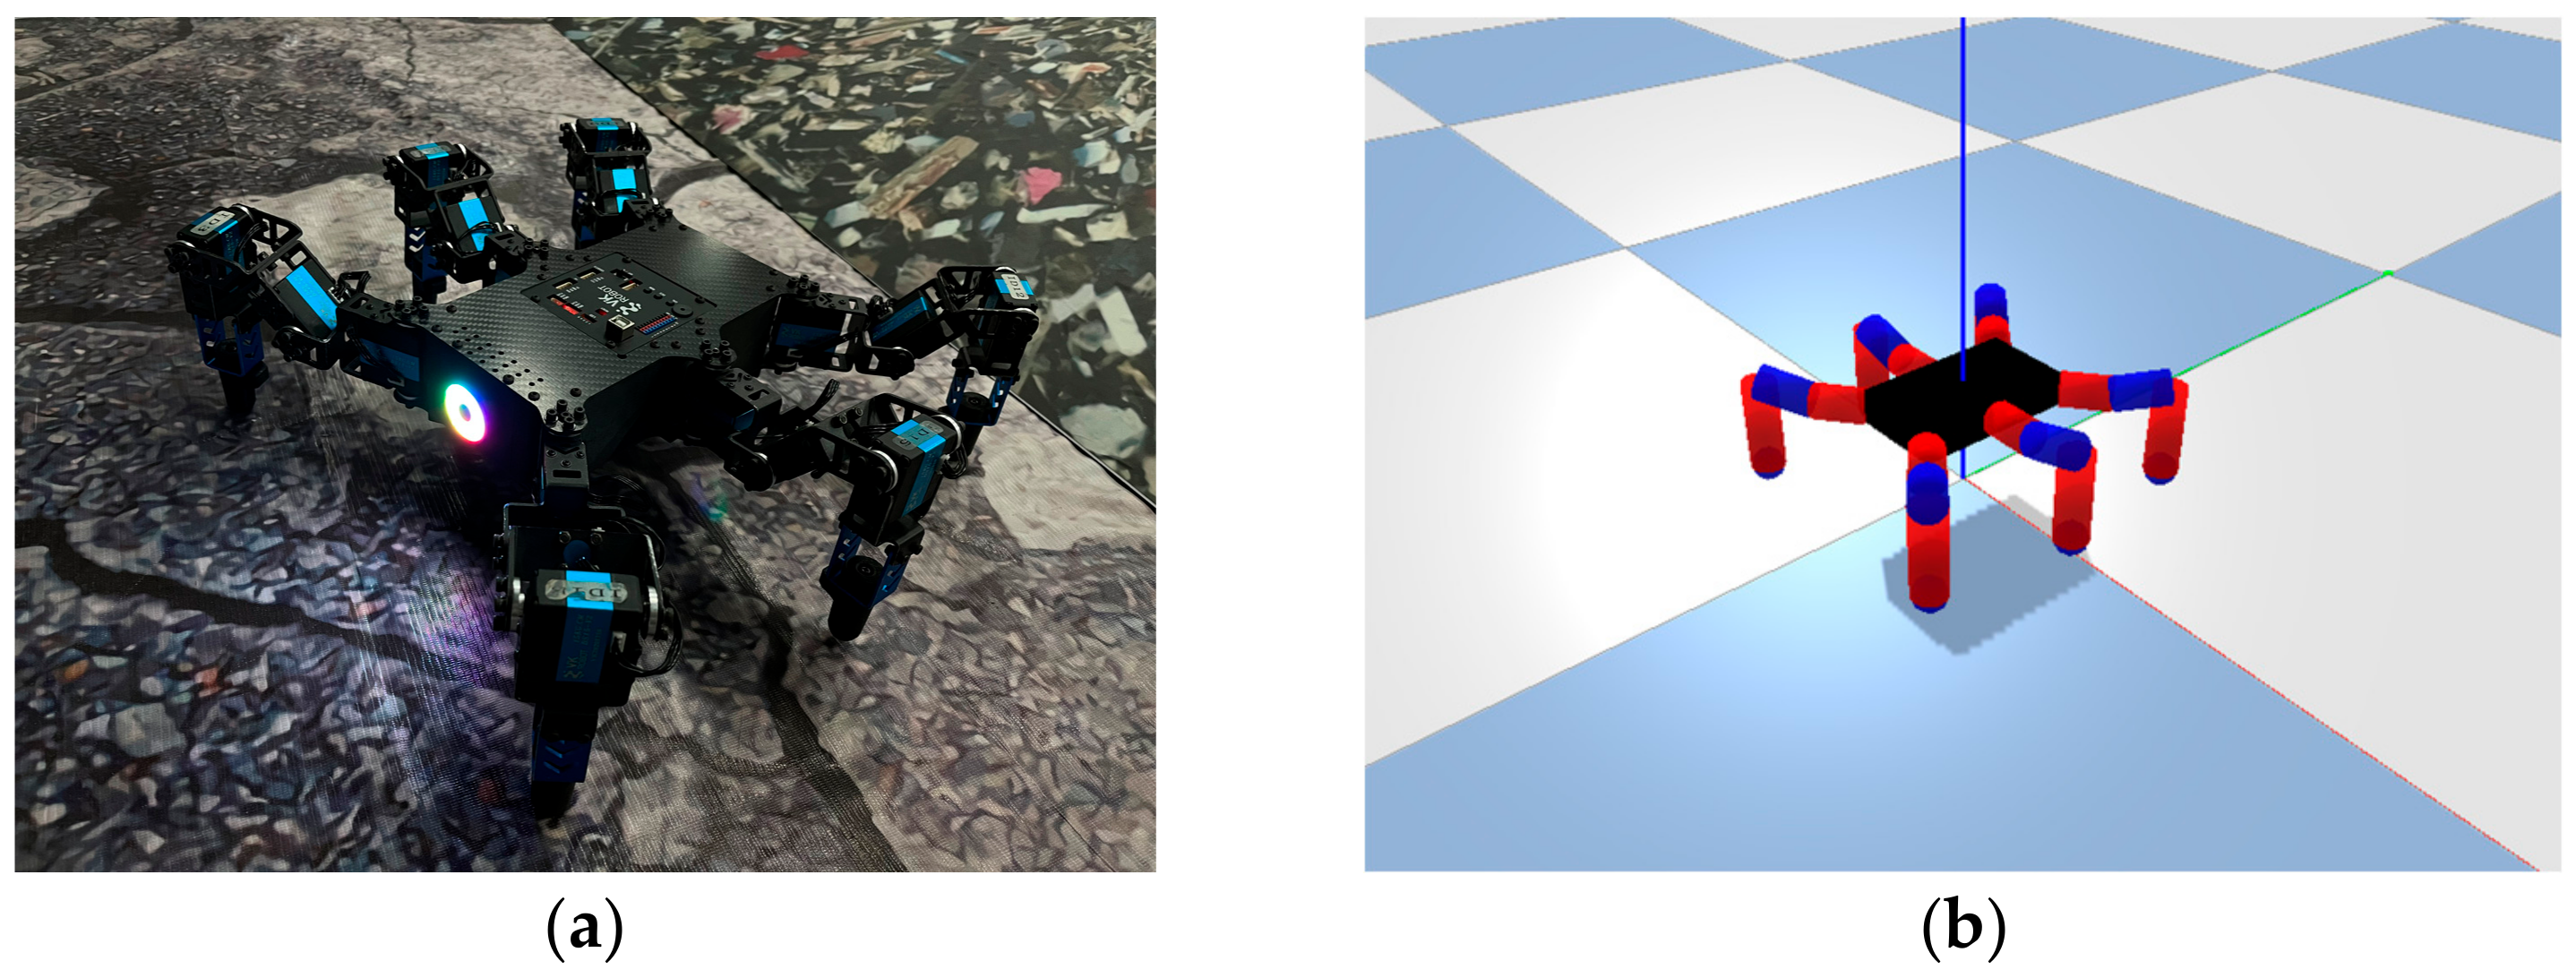 Actuators | Free Full-Text | Adaptive Gait Generation for Hexapod Robots  Based on Reinforcement Learning and Hierarchical Framework